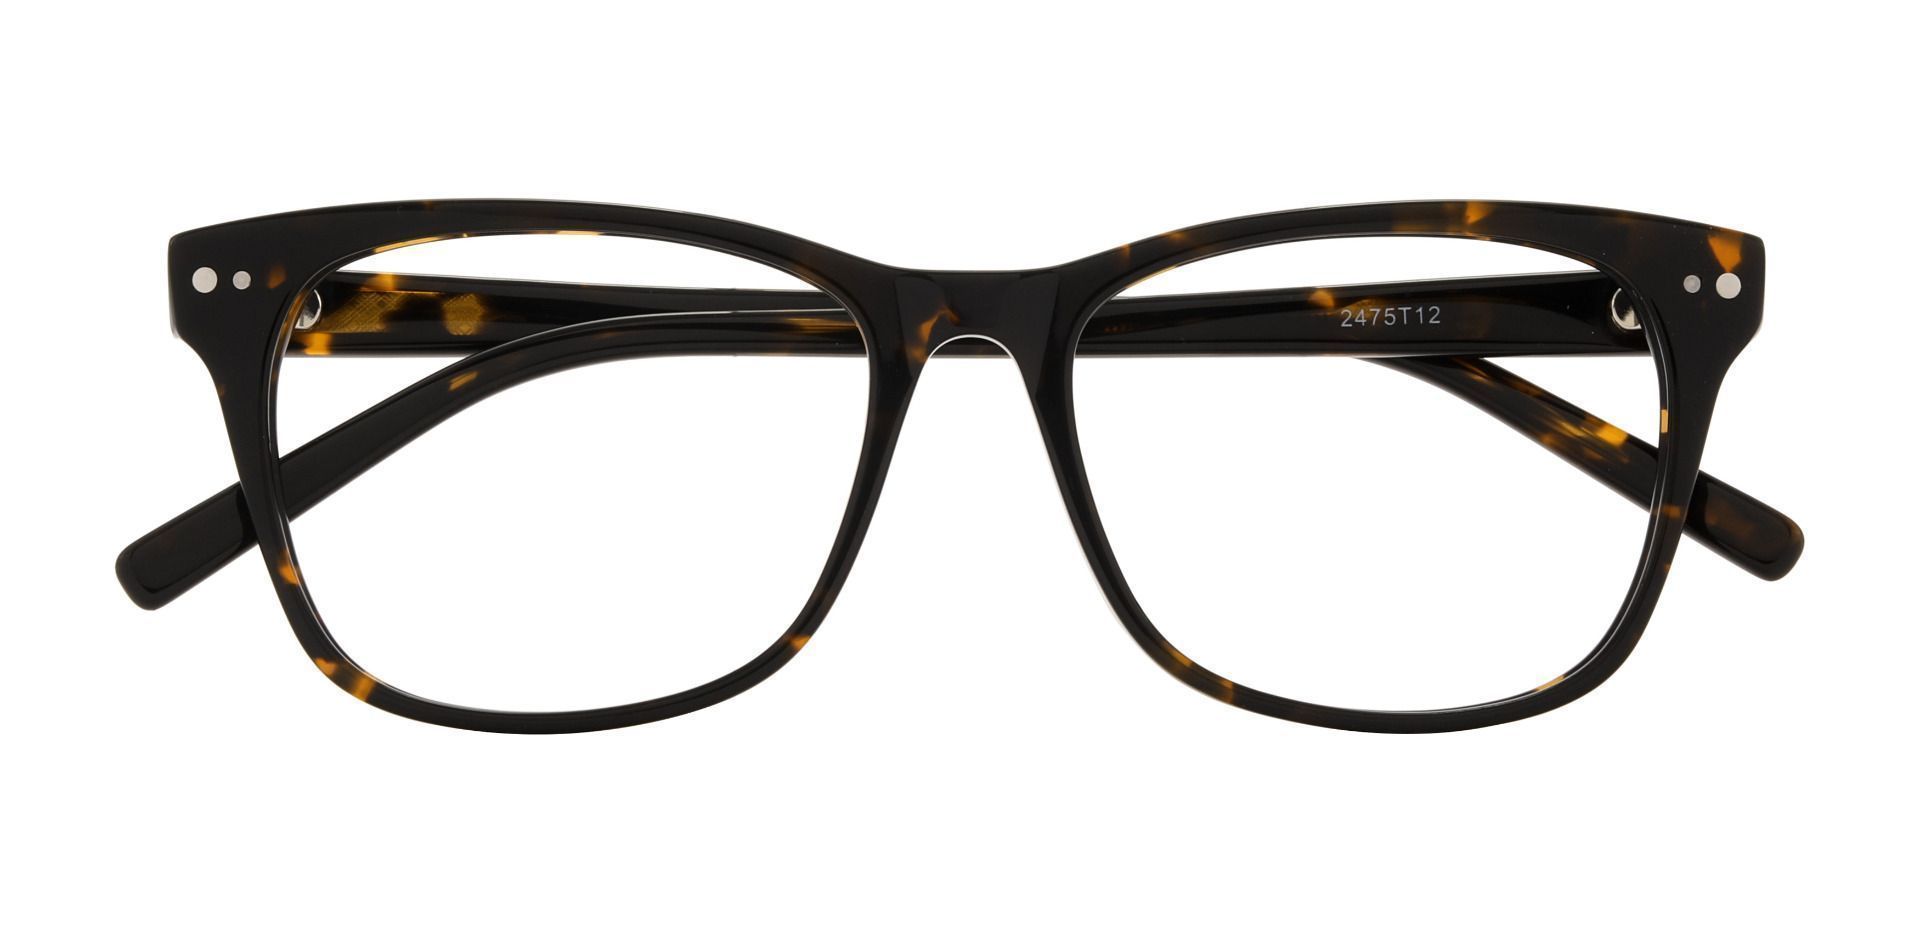 Specsavers Glasses FOLAMI Gold Female | Wire rimmed glasses, Glasses,  Womens glasses